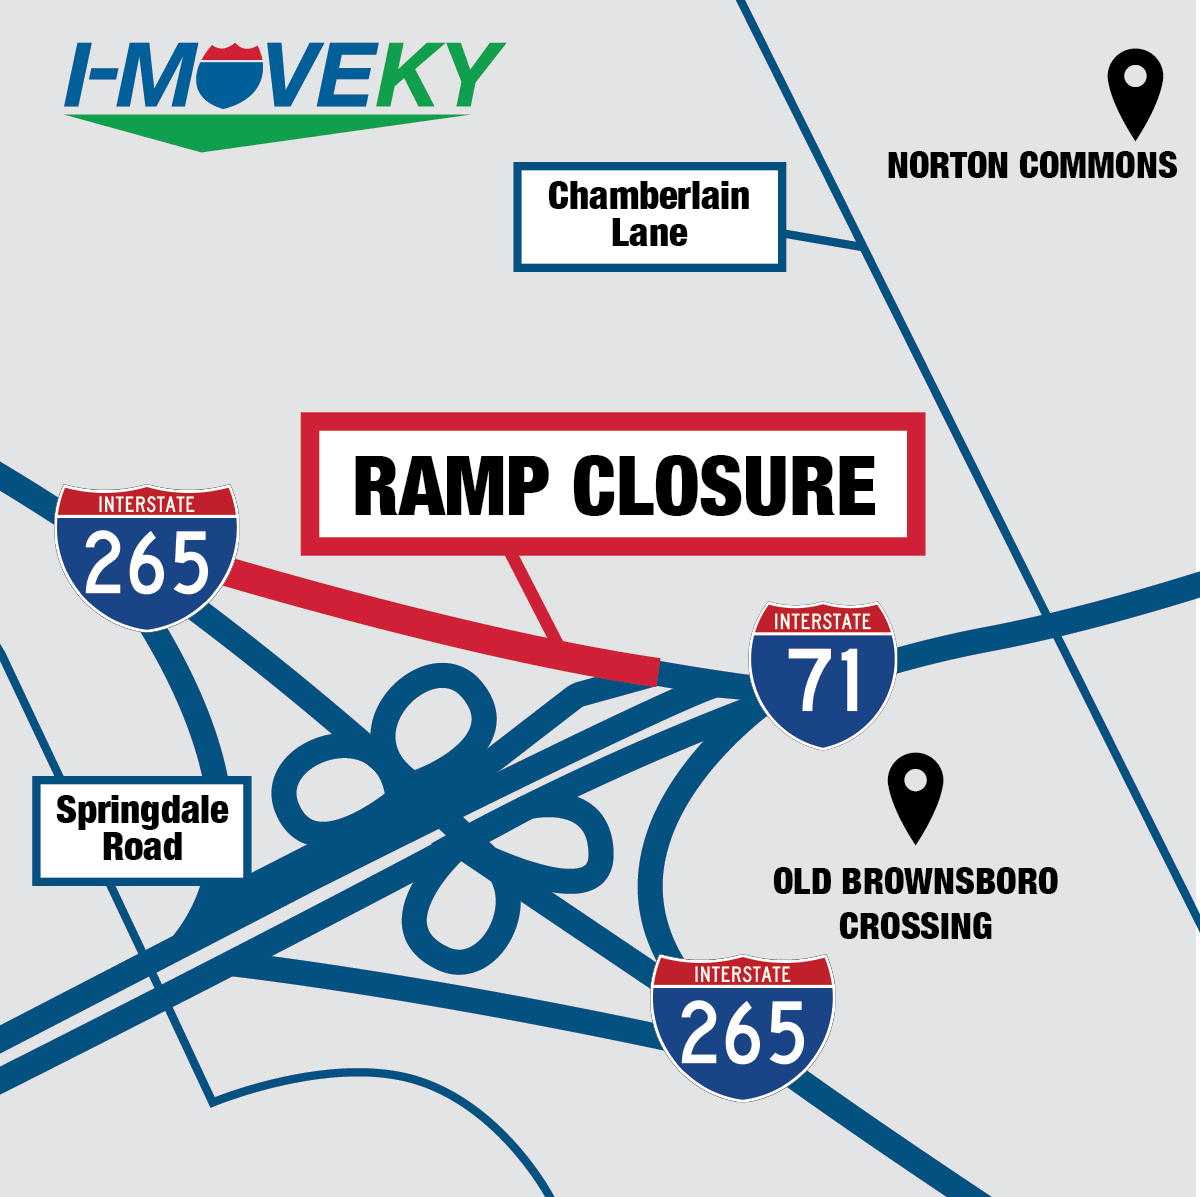 A map showing the ramp closure in red.